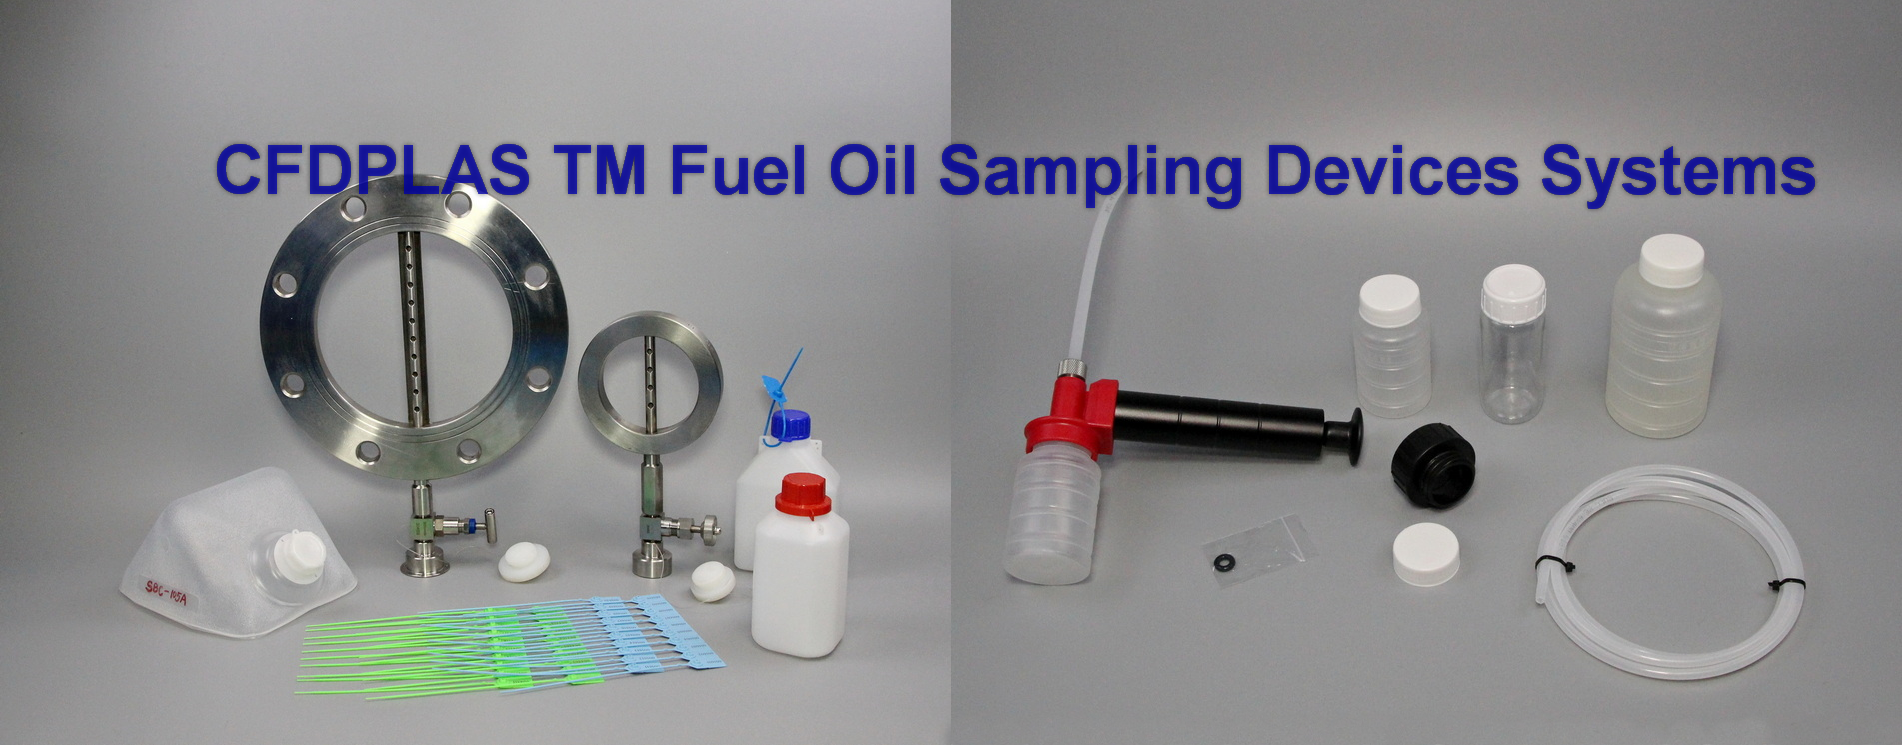 fuel_oil_sampling_systems_CFDPLAS_chntainer_002